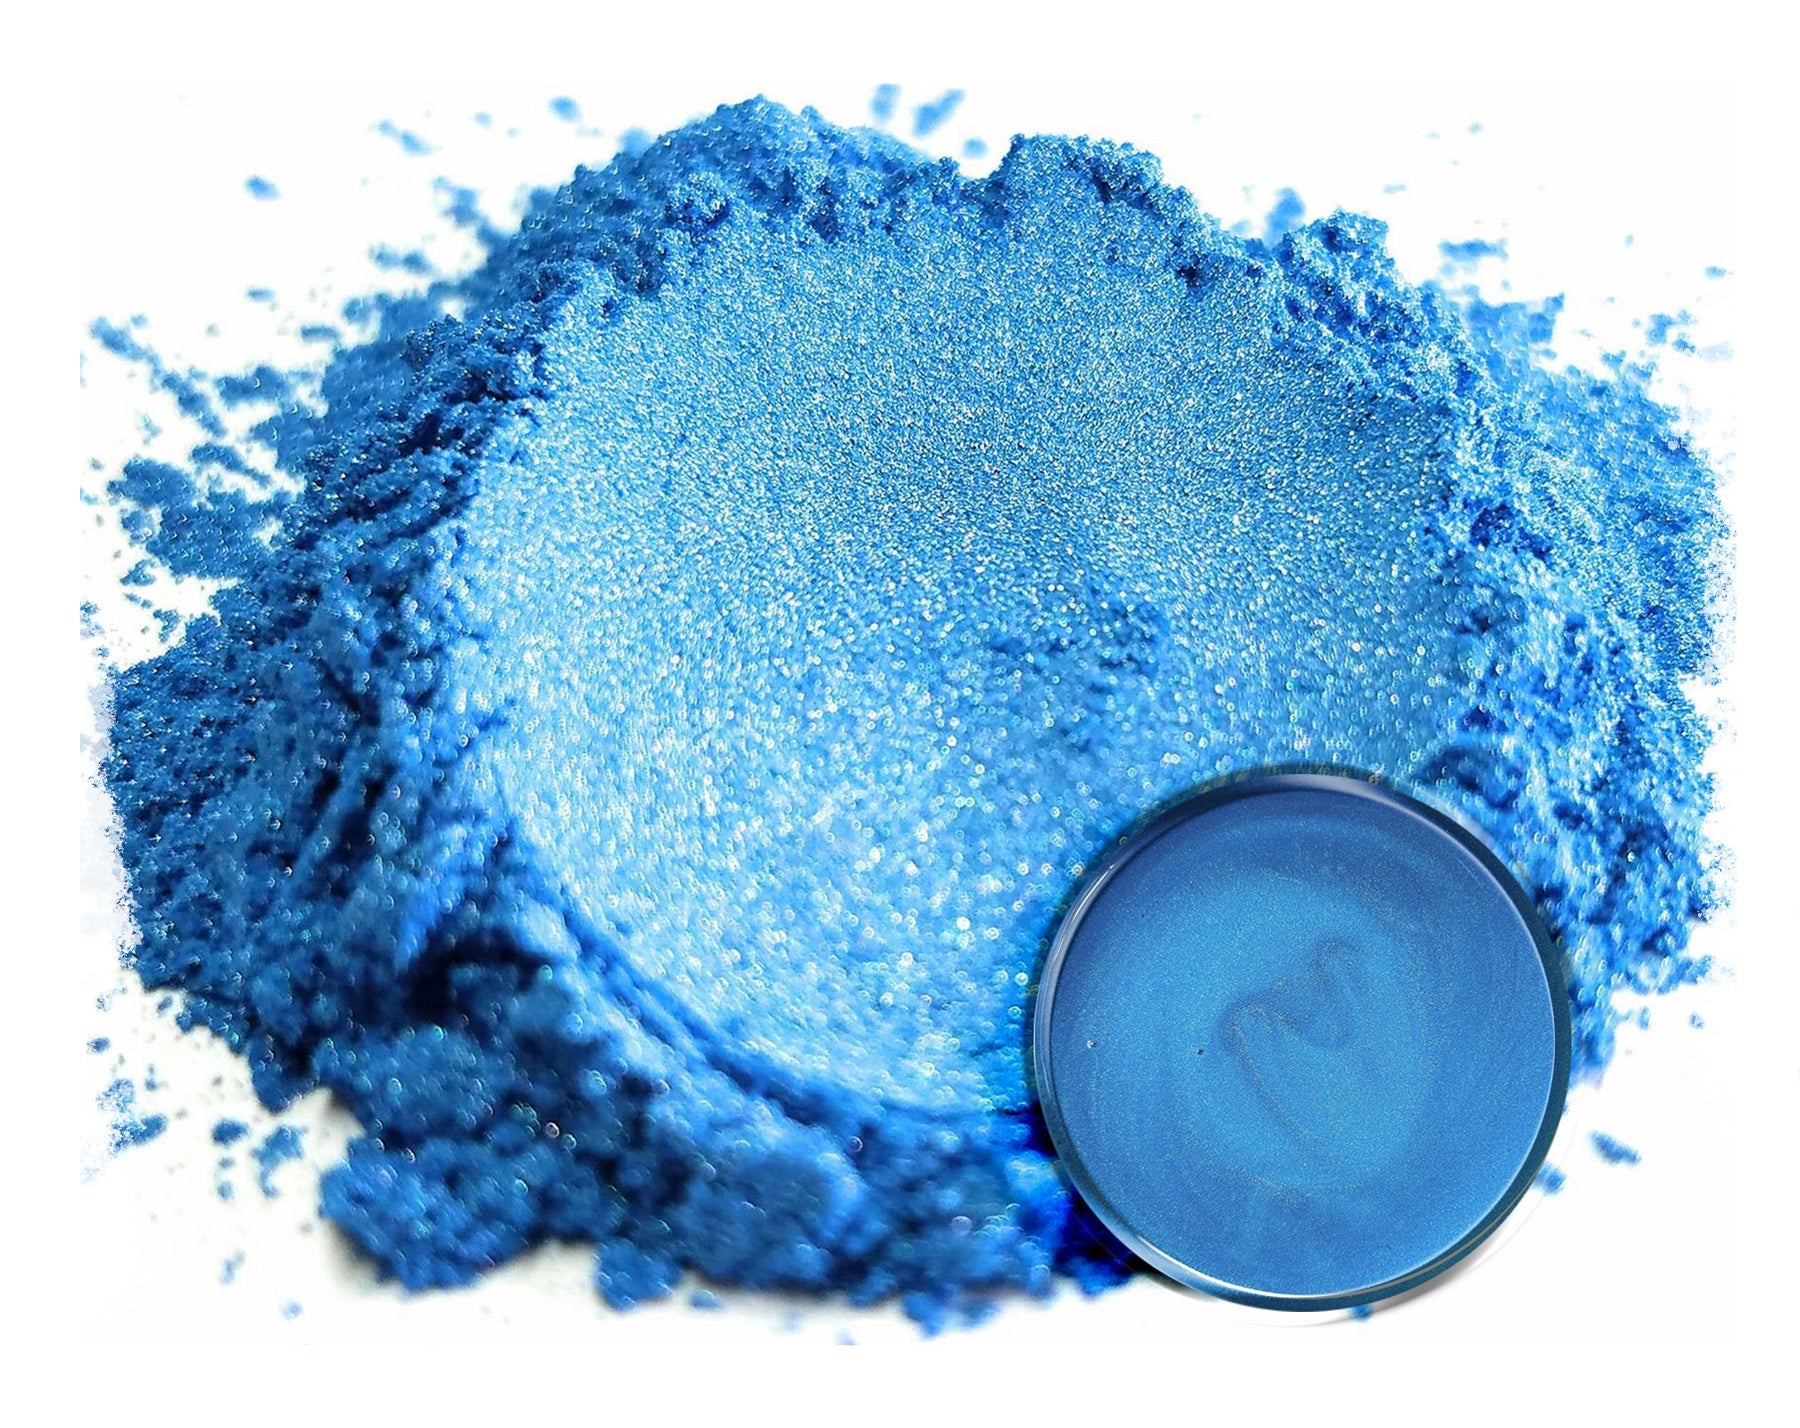 Powdered pigment by eye candy pigments for epoxy resin projects. In the color Umi Blue.